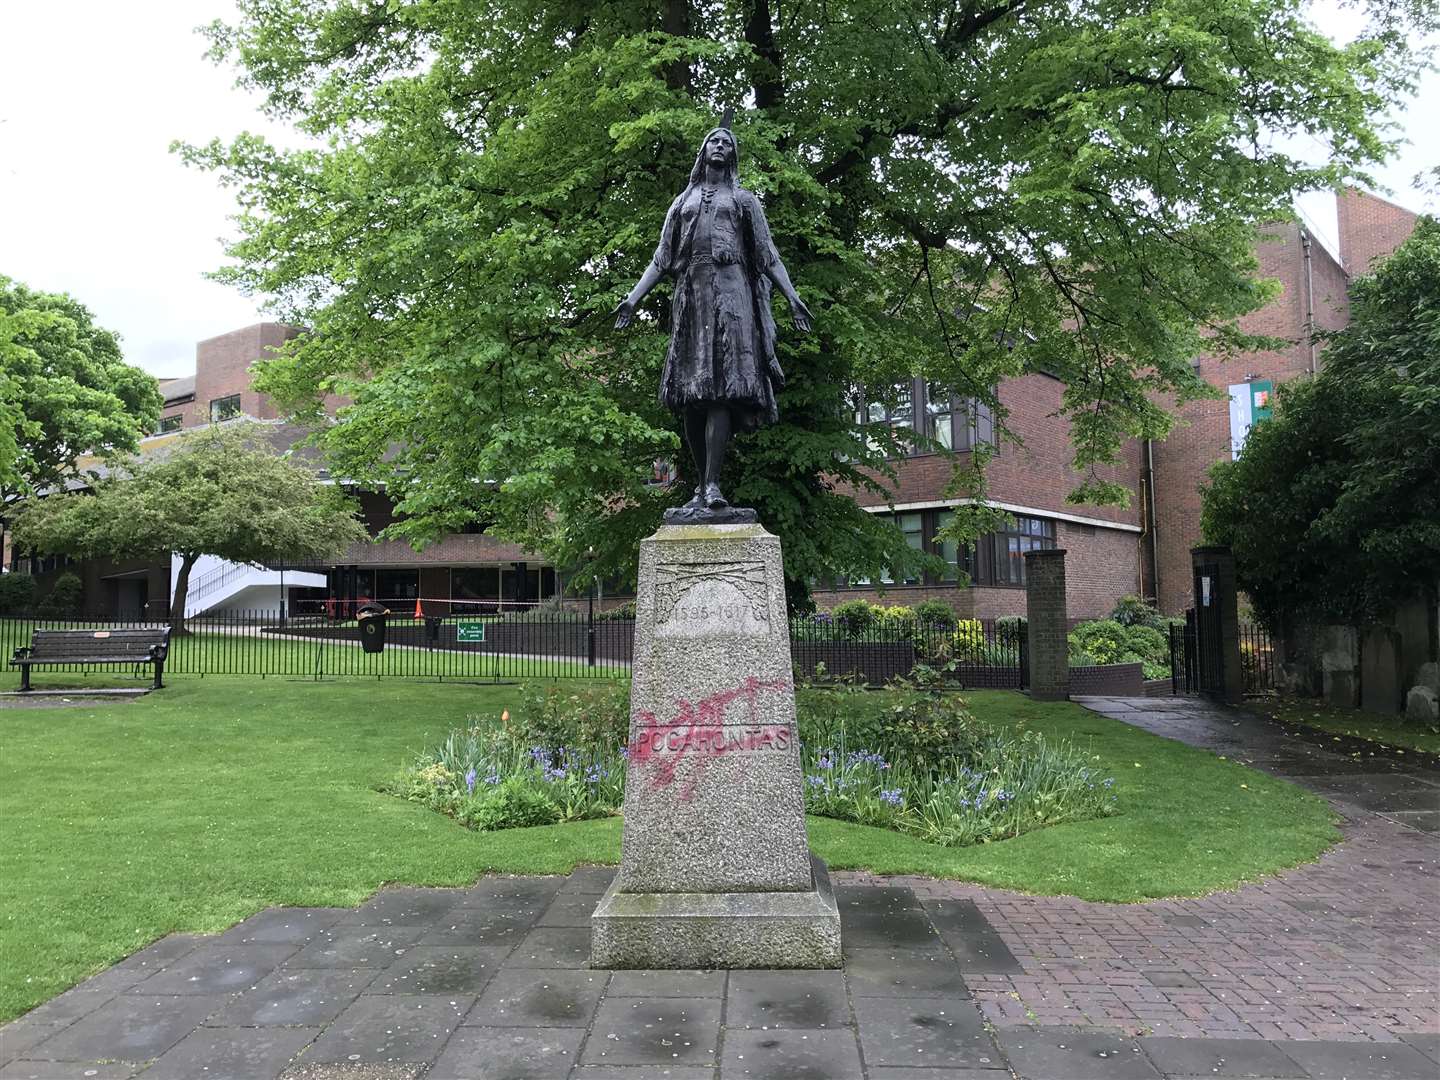 The Pocahontas statue at St George's Church, Gravesend